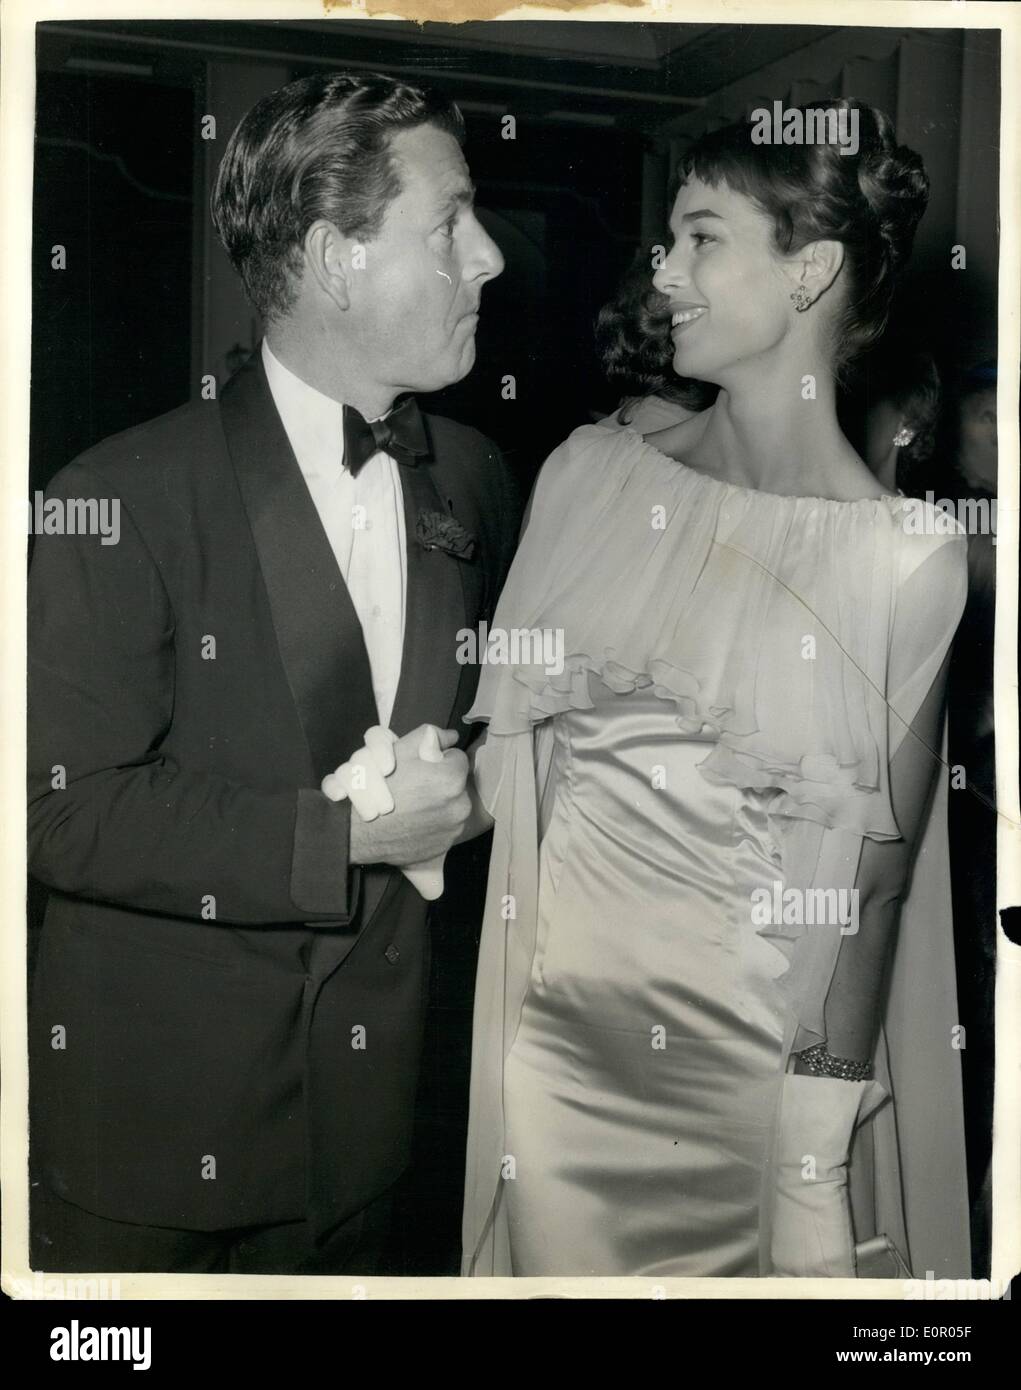 Jul. 07, 1957 - Elsa Martinelli meets Keneth Moore at film Premiere. ''Manuela'' film premiere. Italian screen star Elsa Martinelli seen with British actor Kenneth More when they met at the Odeon Cinema , Marble Arch last night at the premiere of Elsa's new film ''Manuela''. The Duke of Edinburgh attended the premiere which is in aid of charity. Stock Photo